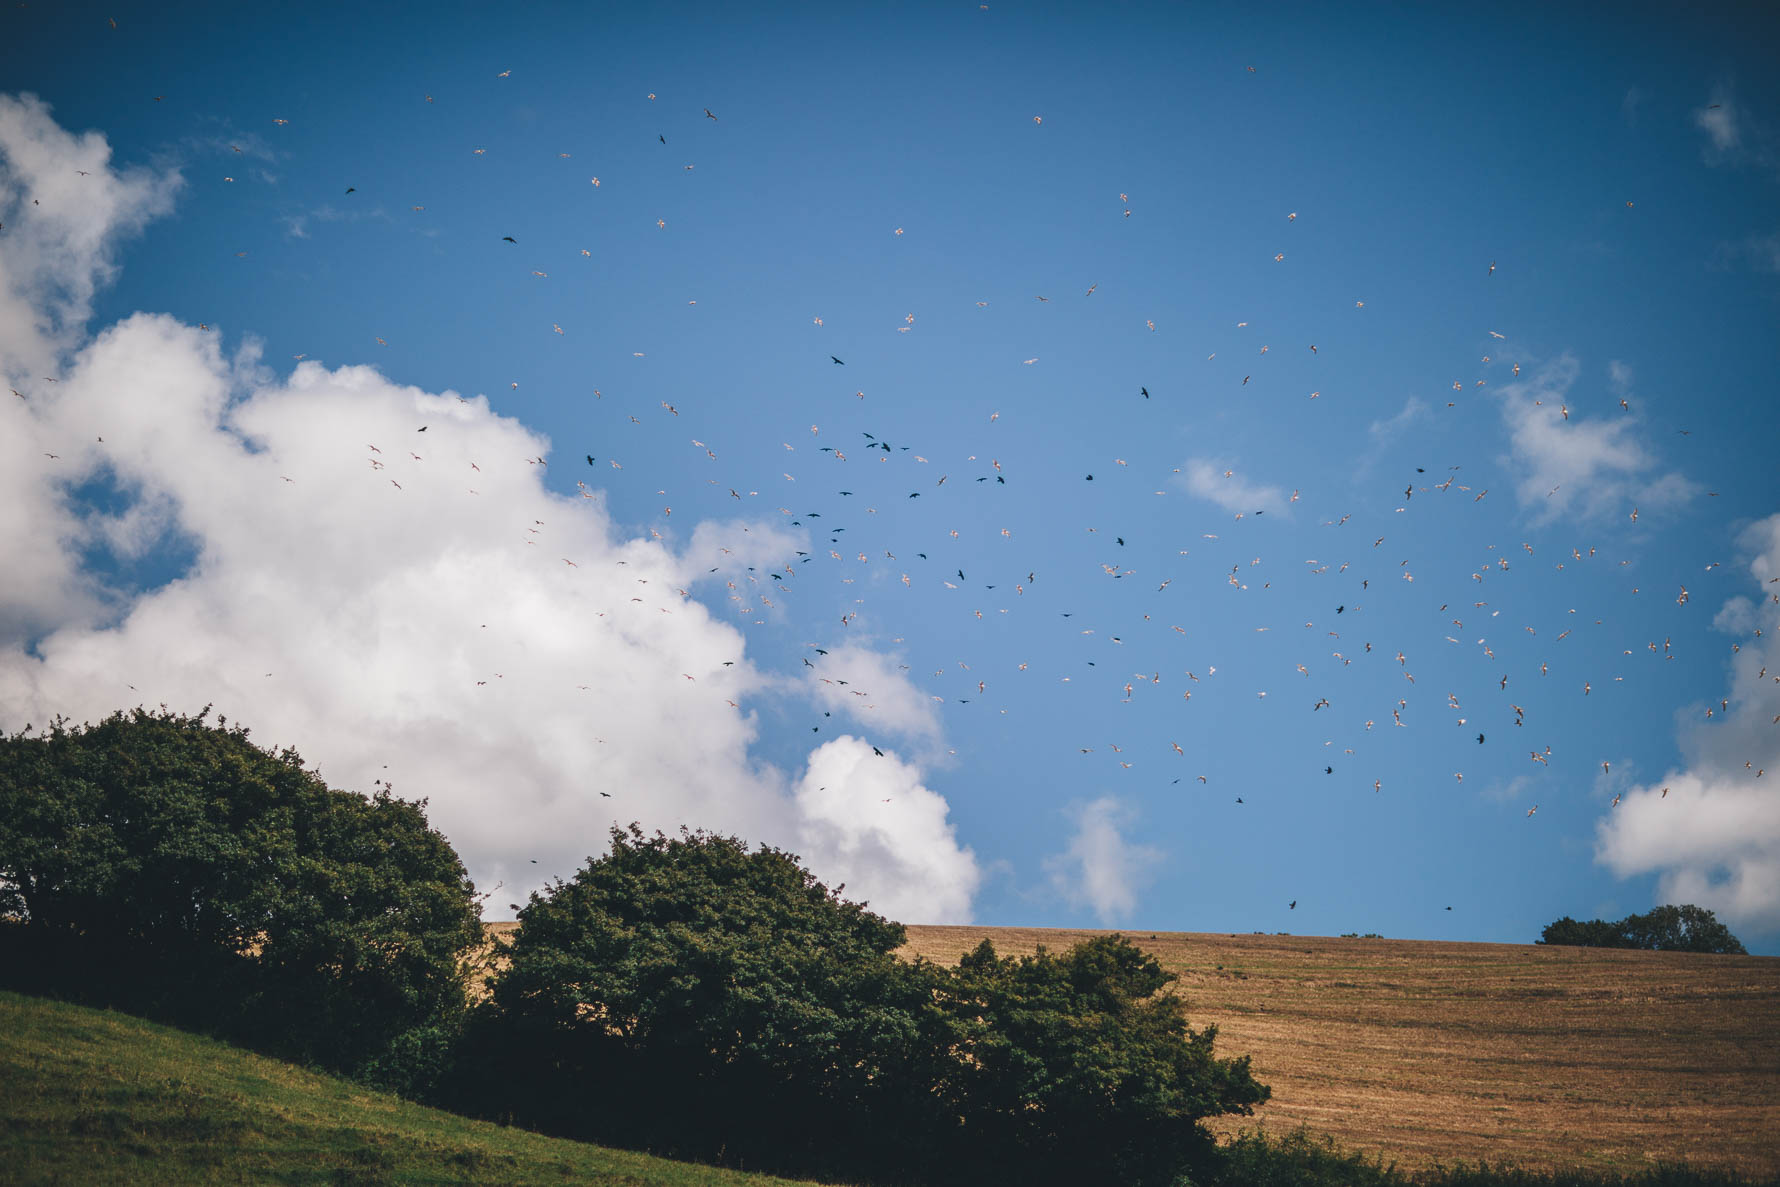 Flock of birds flying across a blue sky in the Devonshire countryside with fields below and white clouds in the background